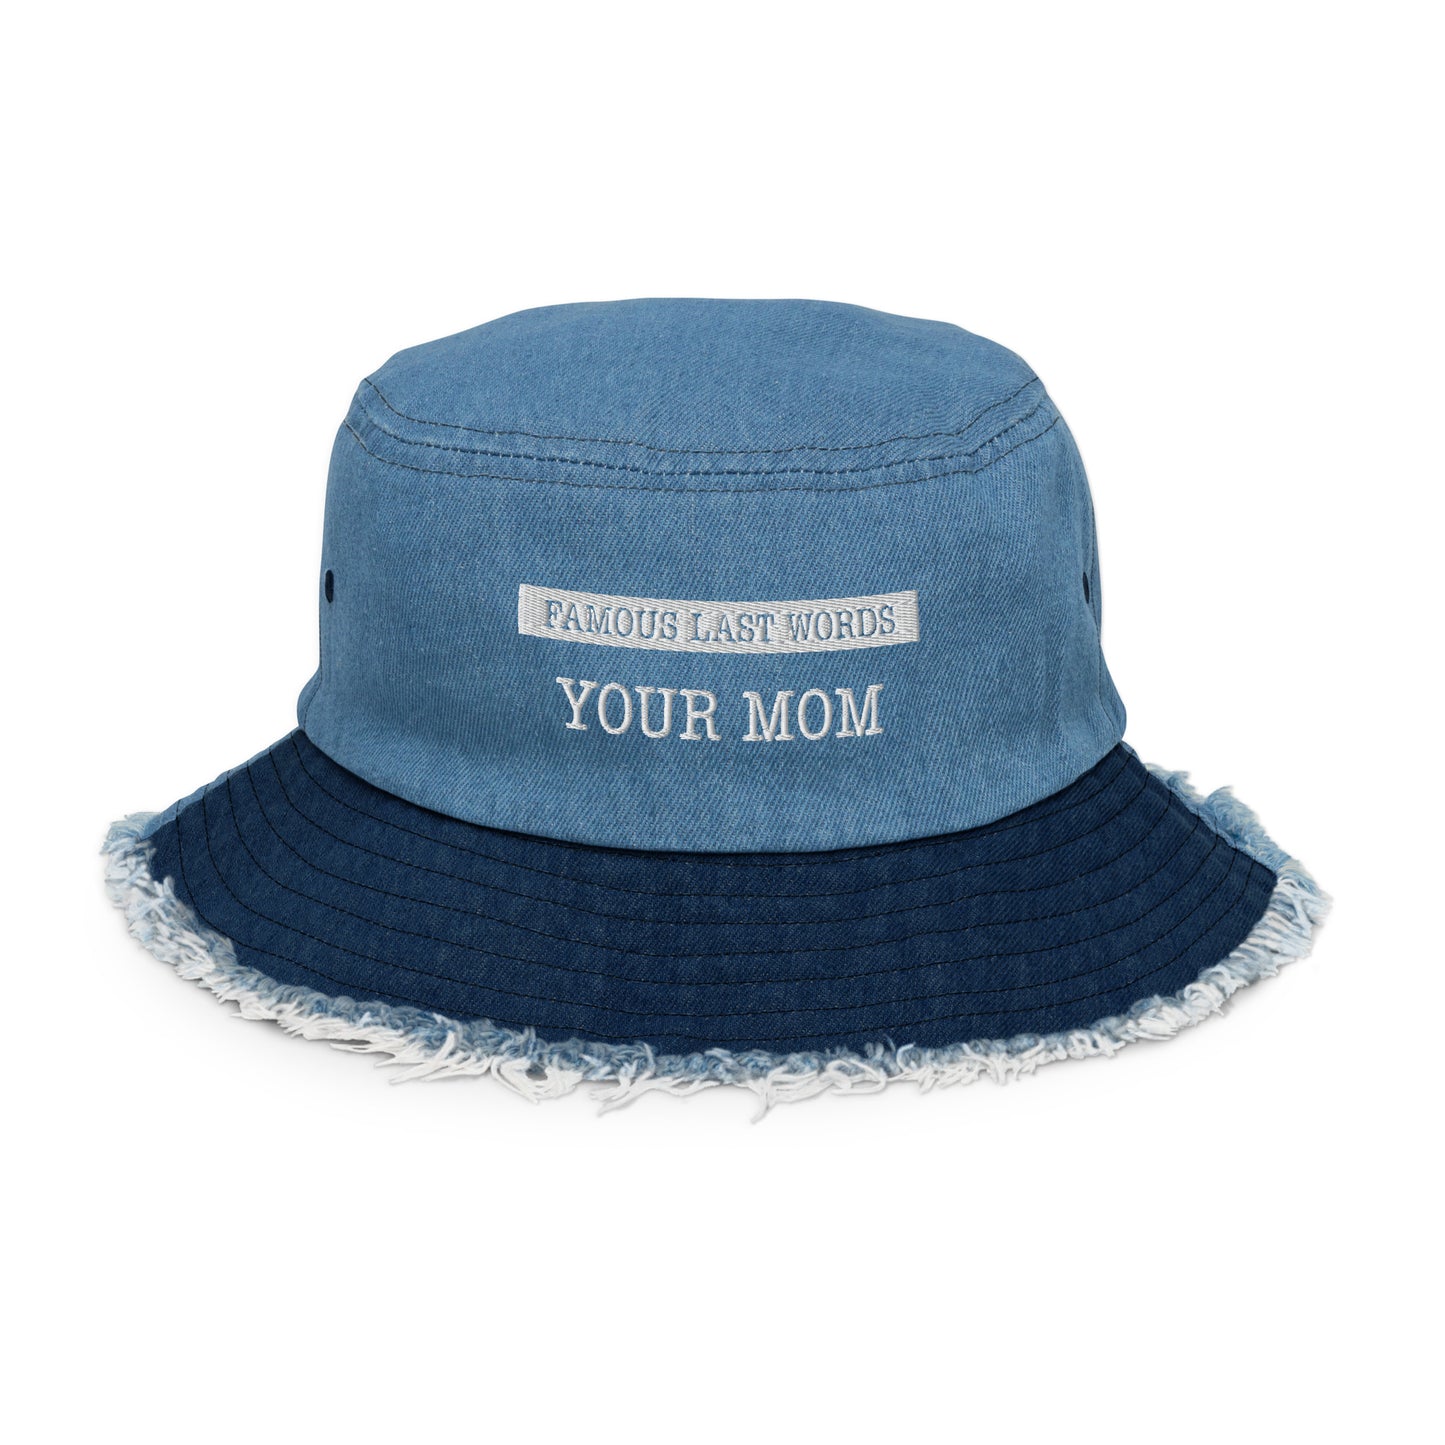 Famous Last Words - Your Mom Embroidered Bucket Hat